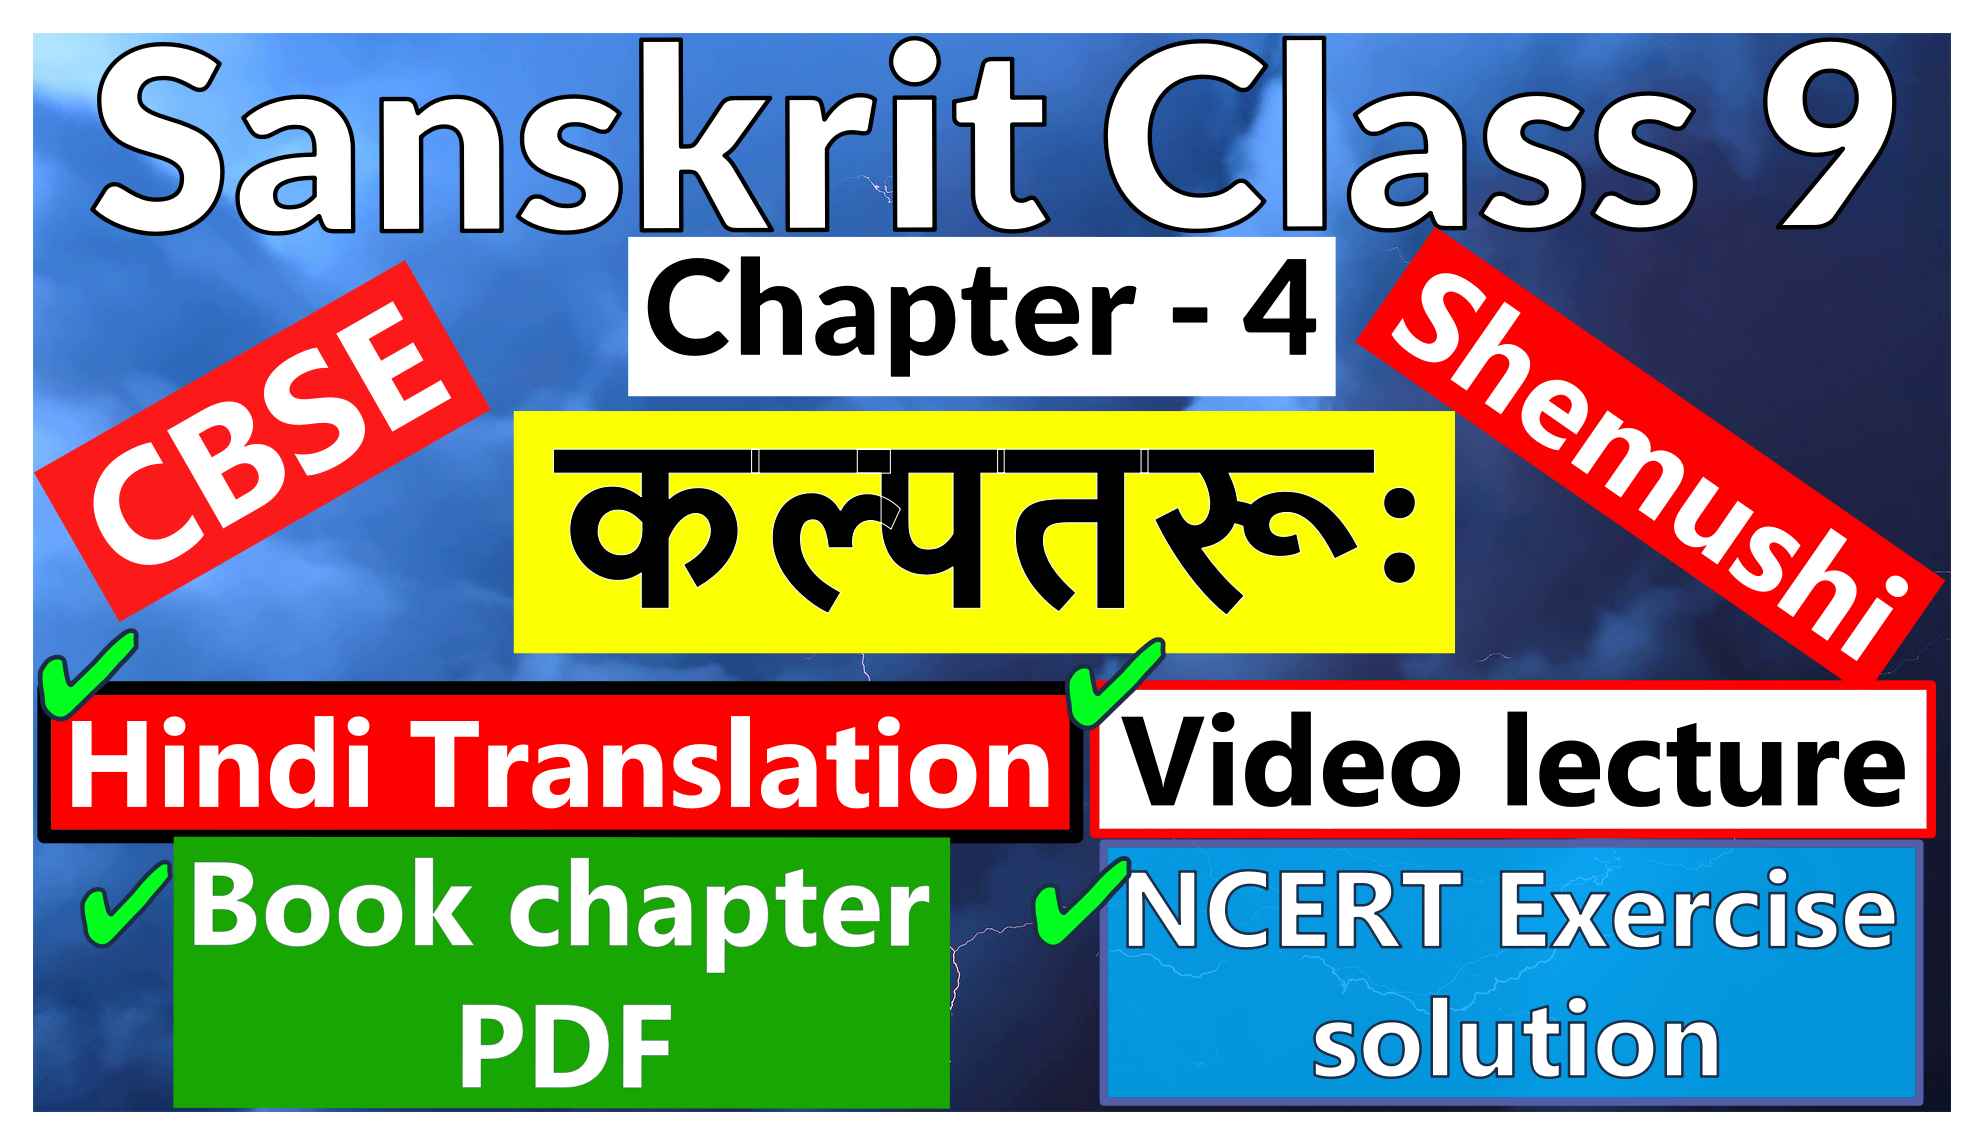 Sanskrit Class 9- Chapter 4 -कल्पतरूः- Hindi Translation, Video lecture, NCERT Exercise solution (Question-Answer), Book chapter PDF